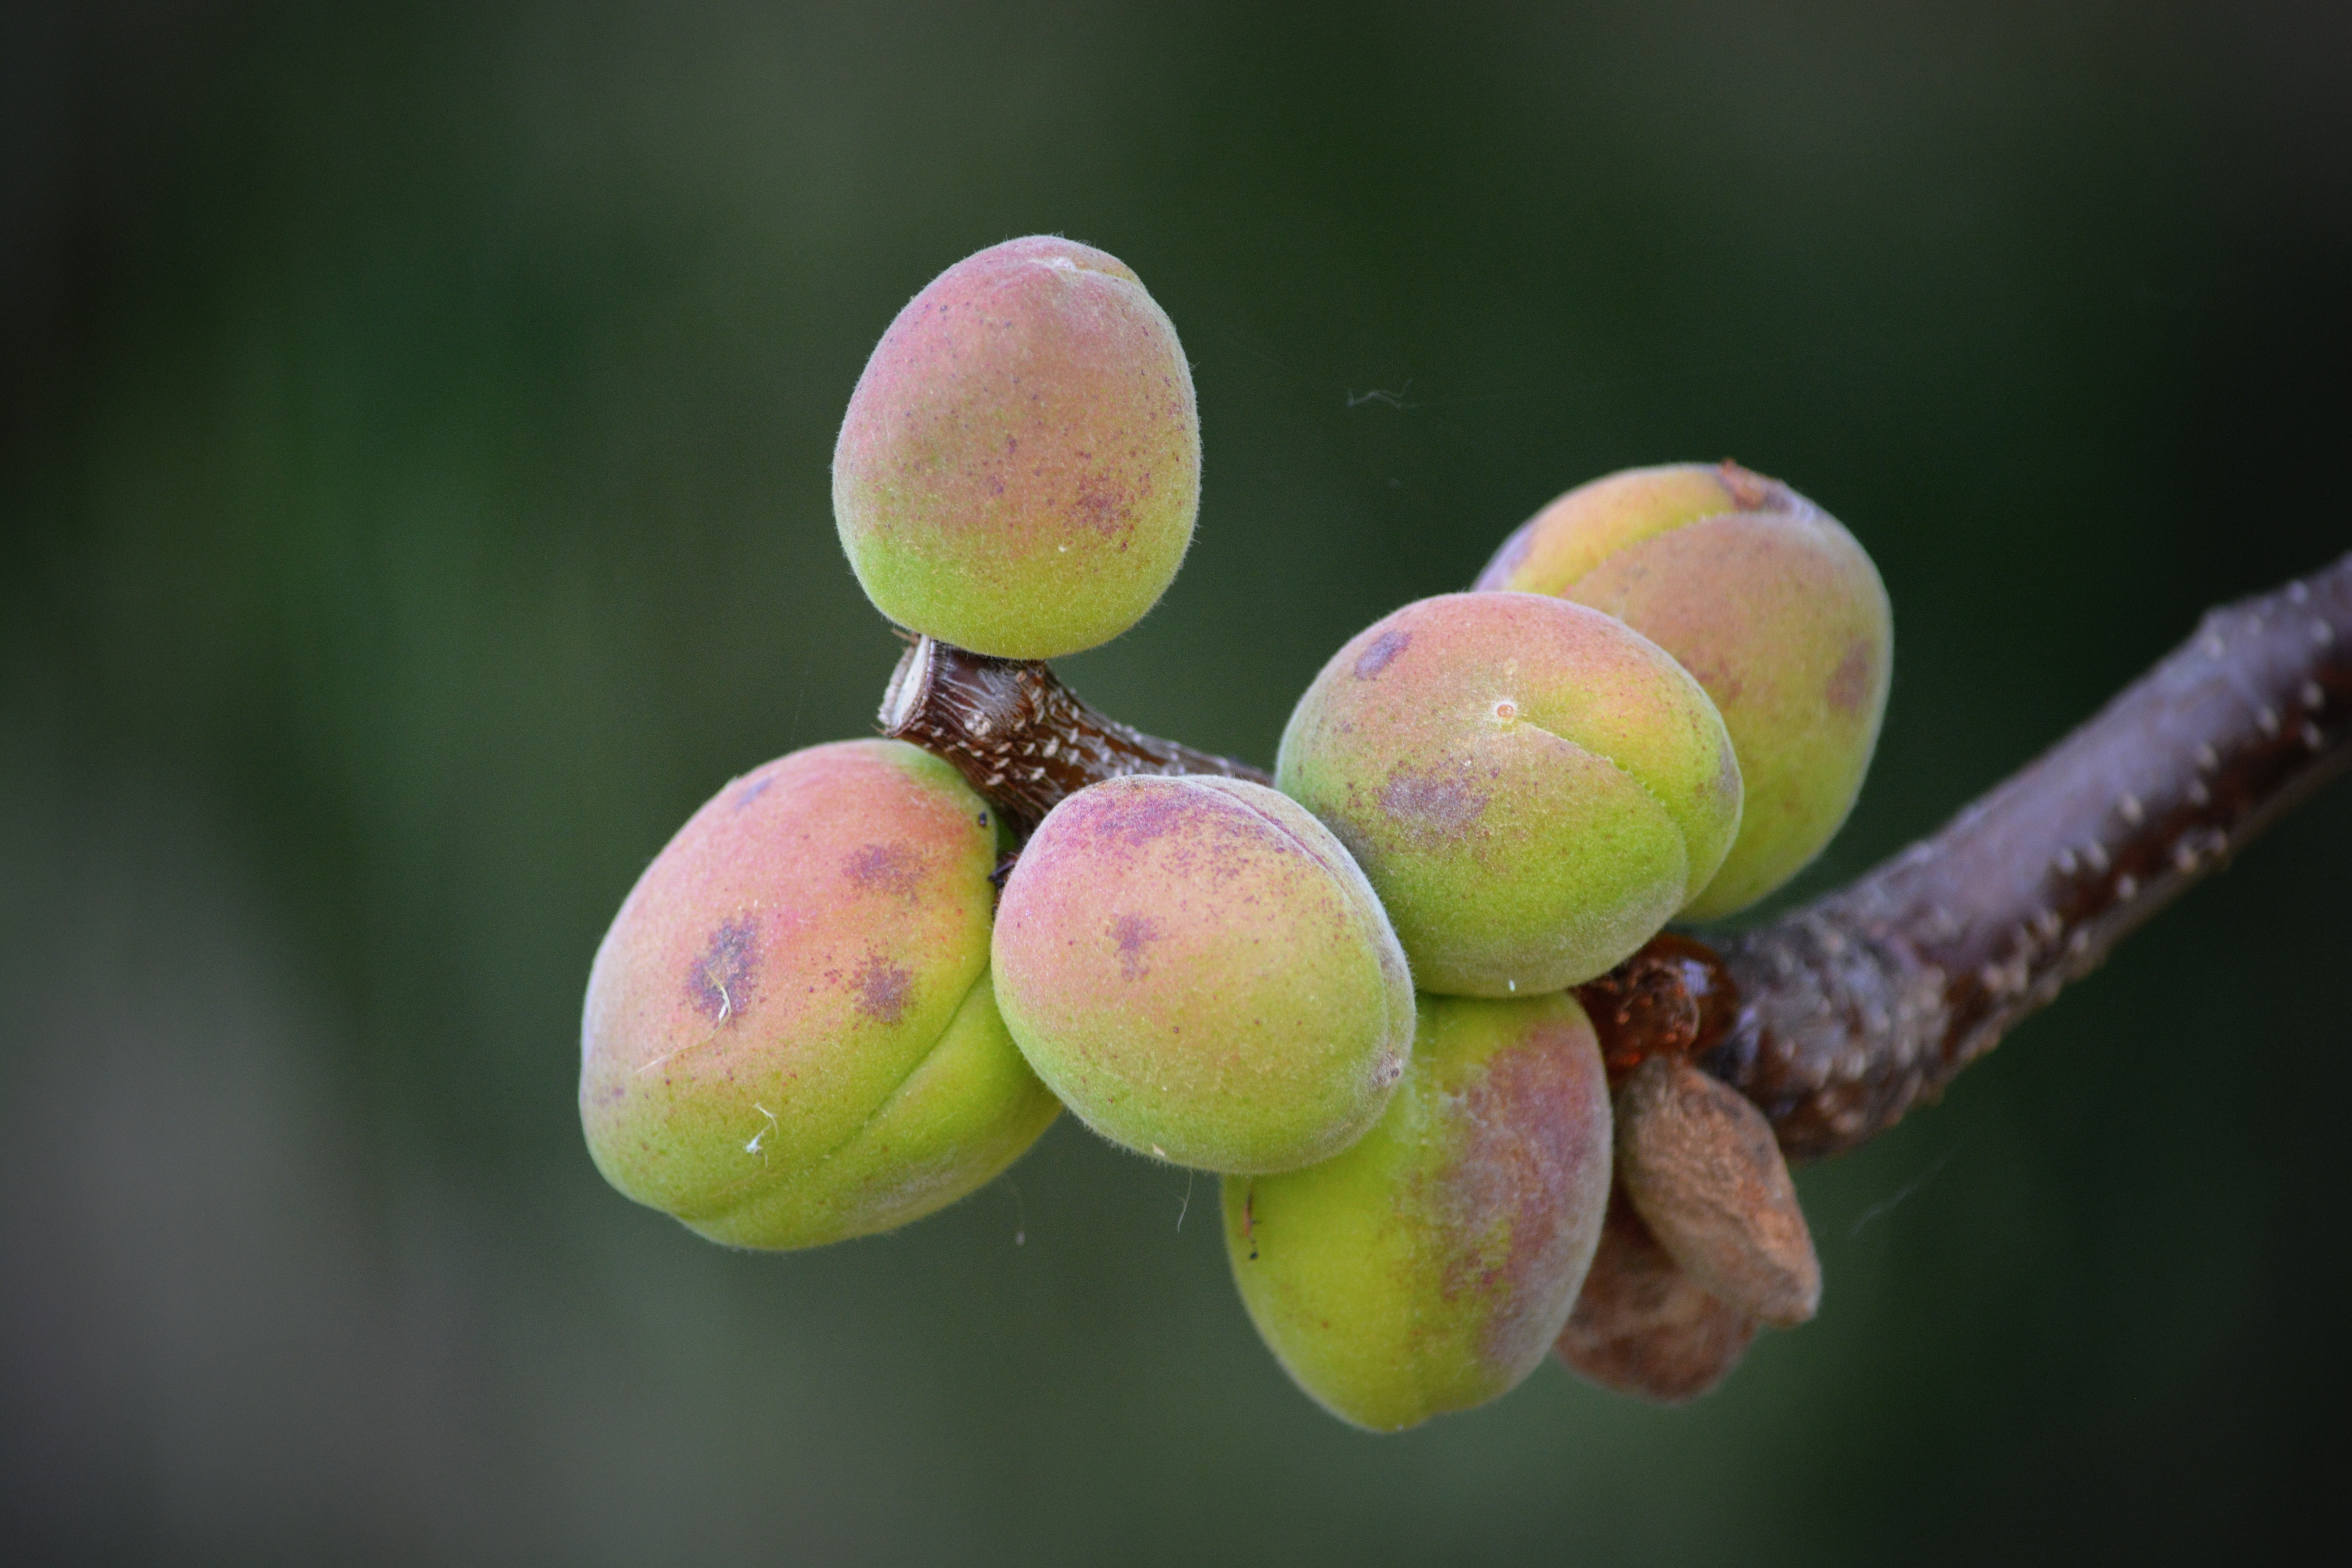 shallow focus photography of green oval fruits on twig